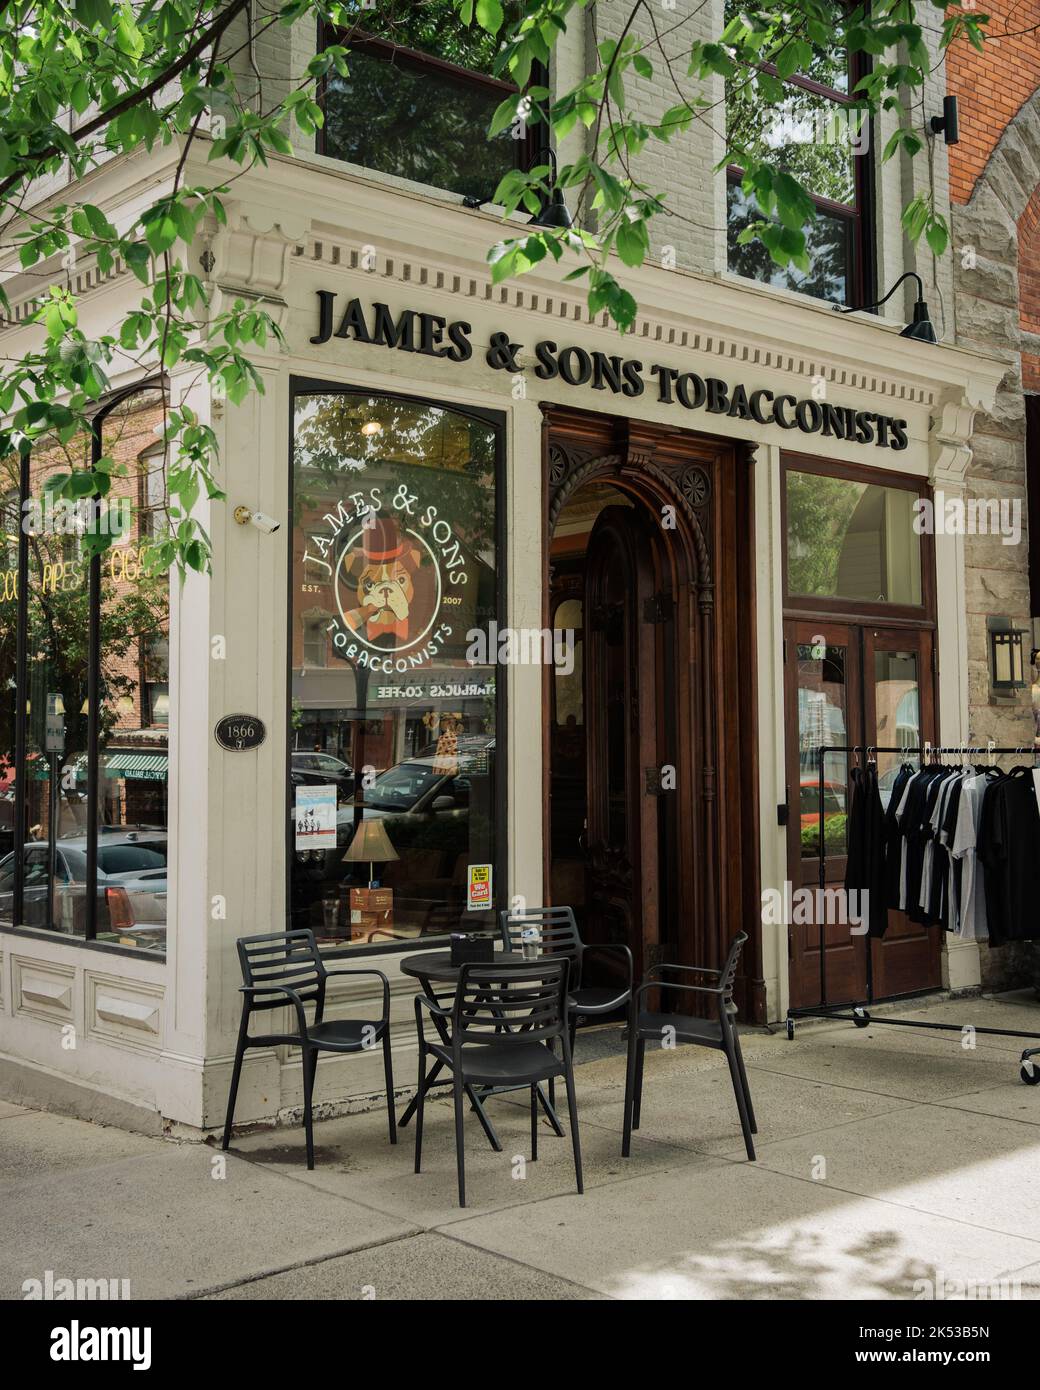 Boutique James & Sons Tobacconists, Saratoga Springs, New York Banque D'Images